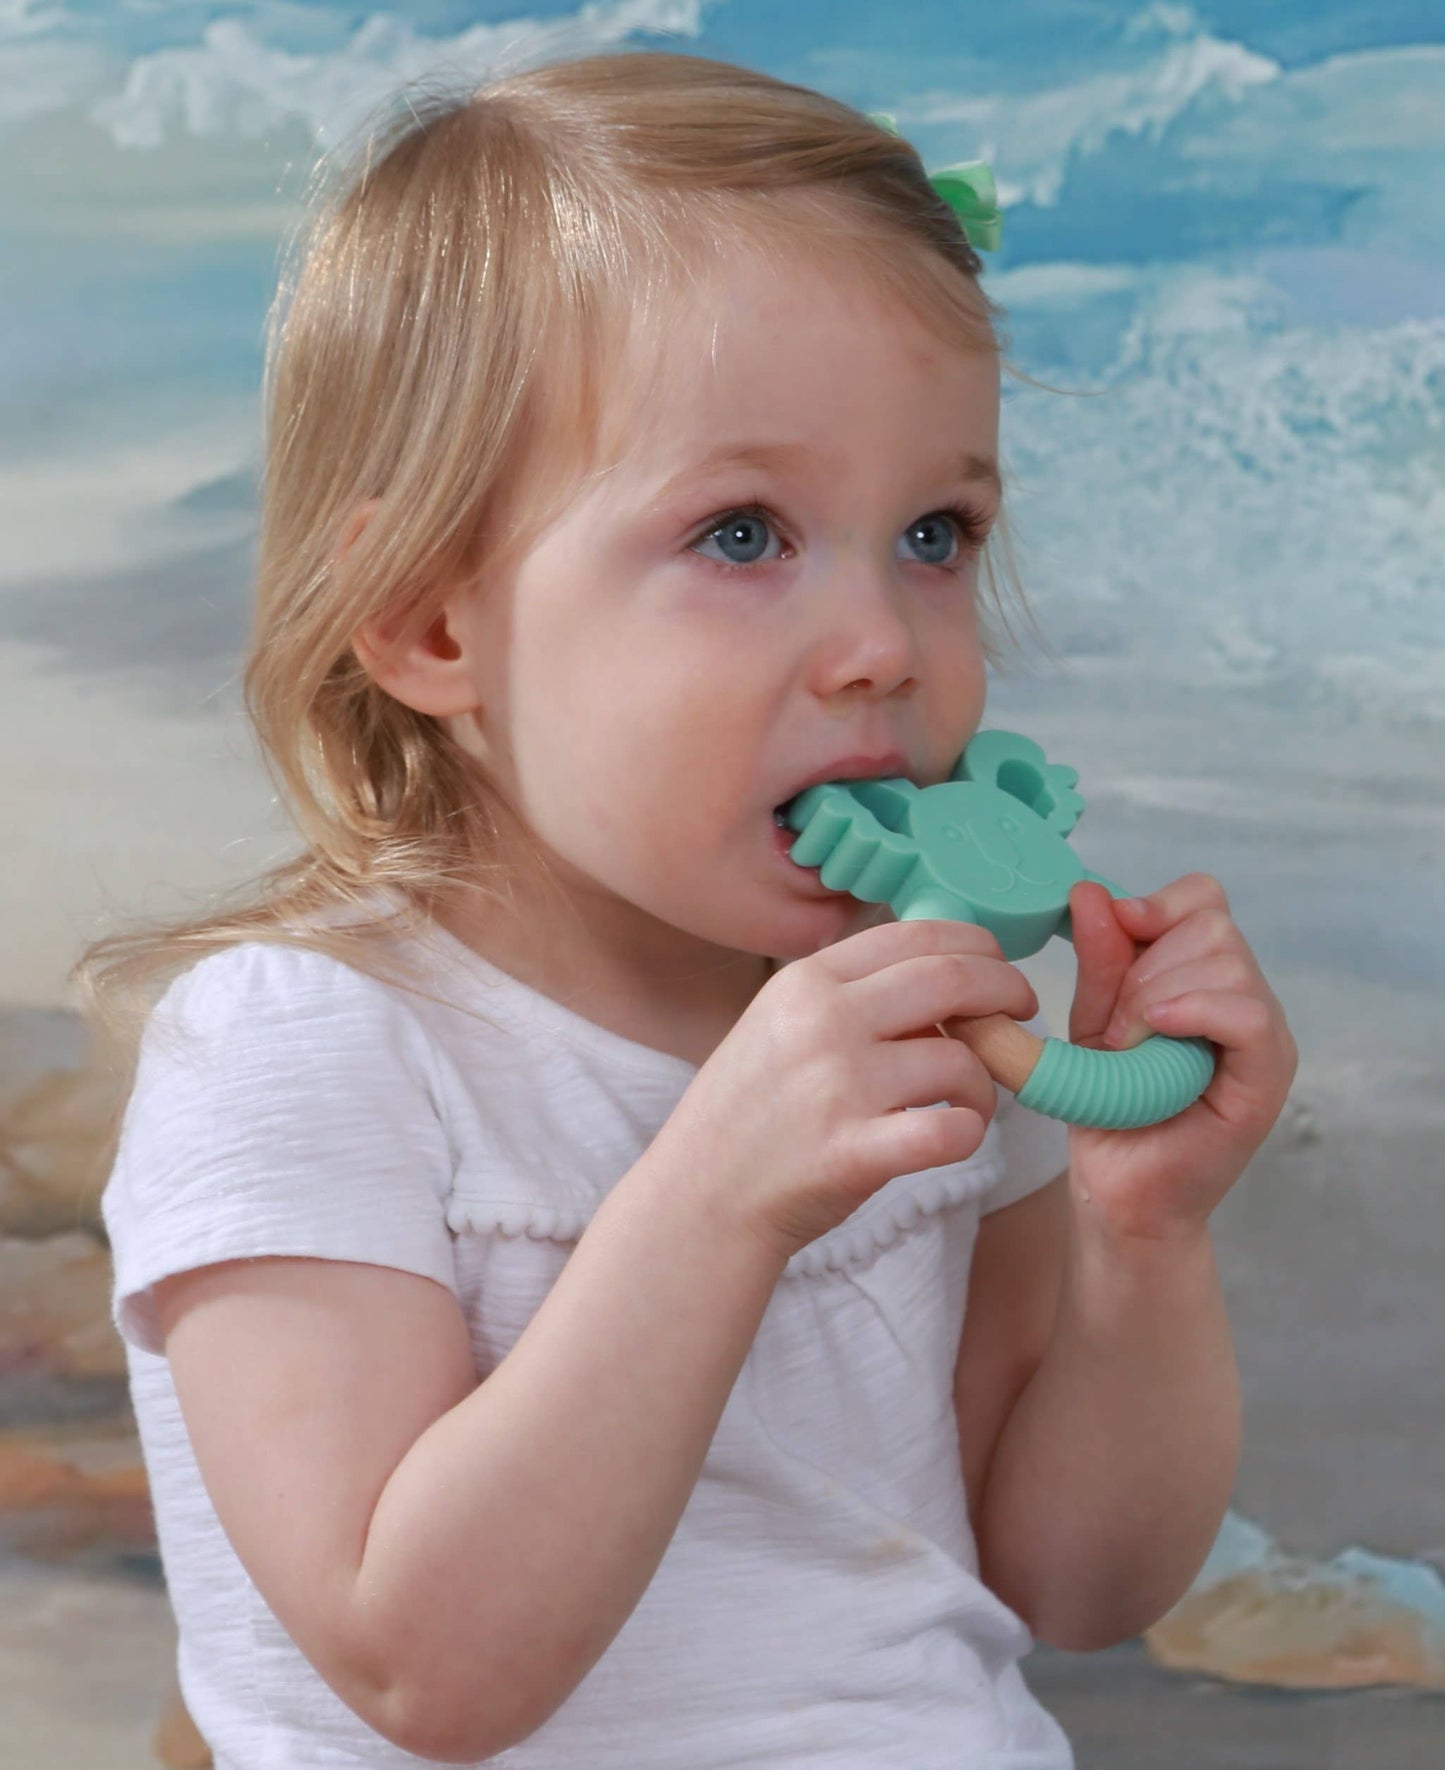 Bamboo & Silicone Teether Assortment